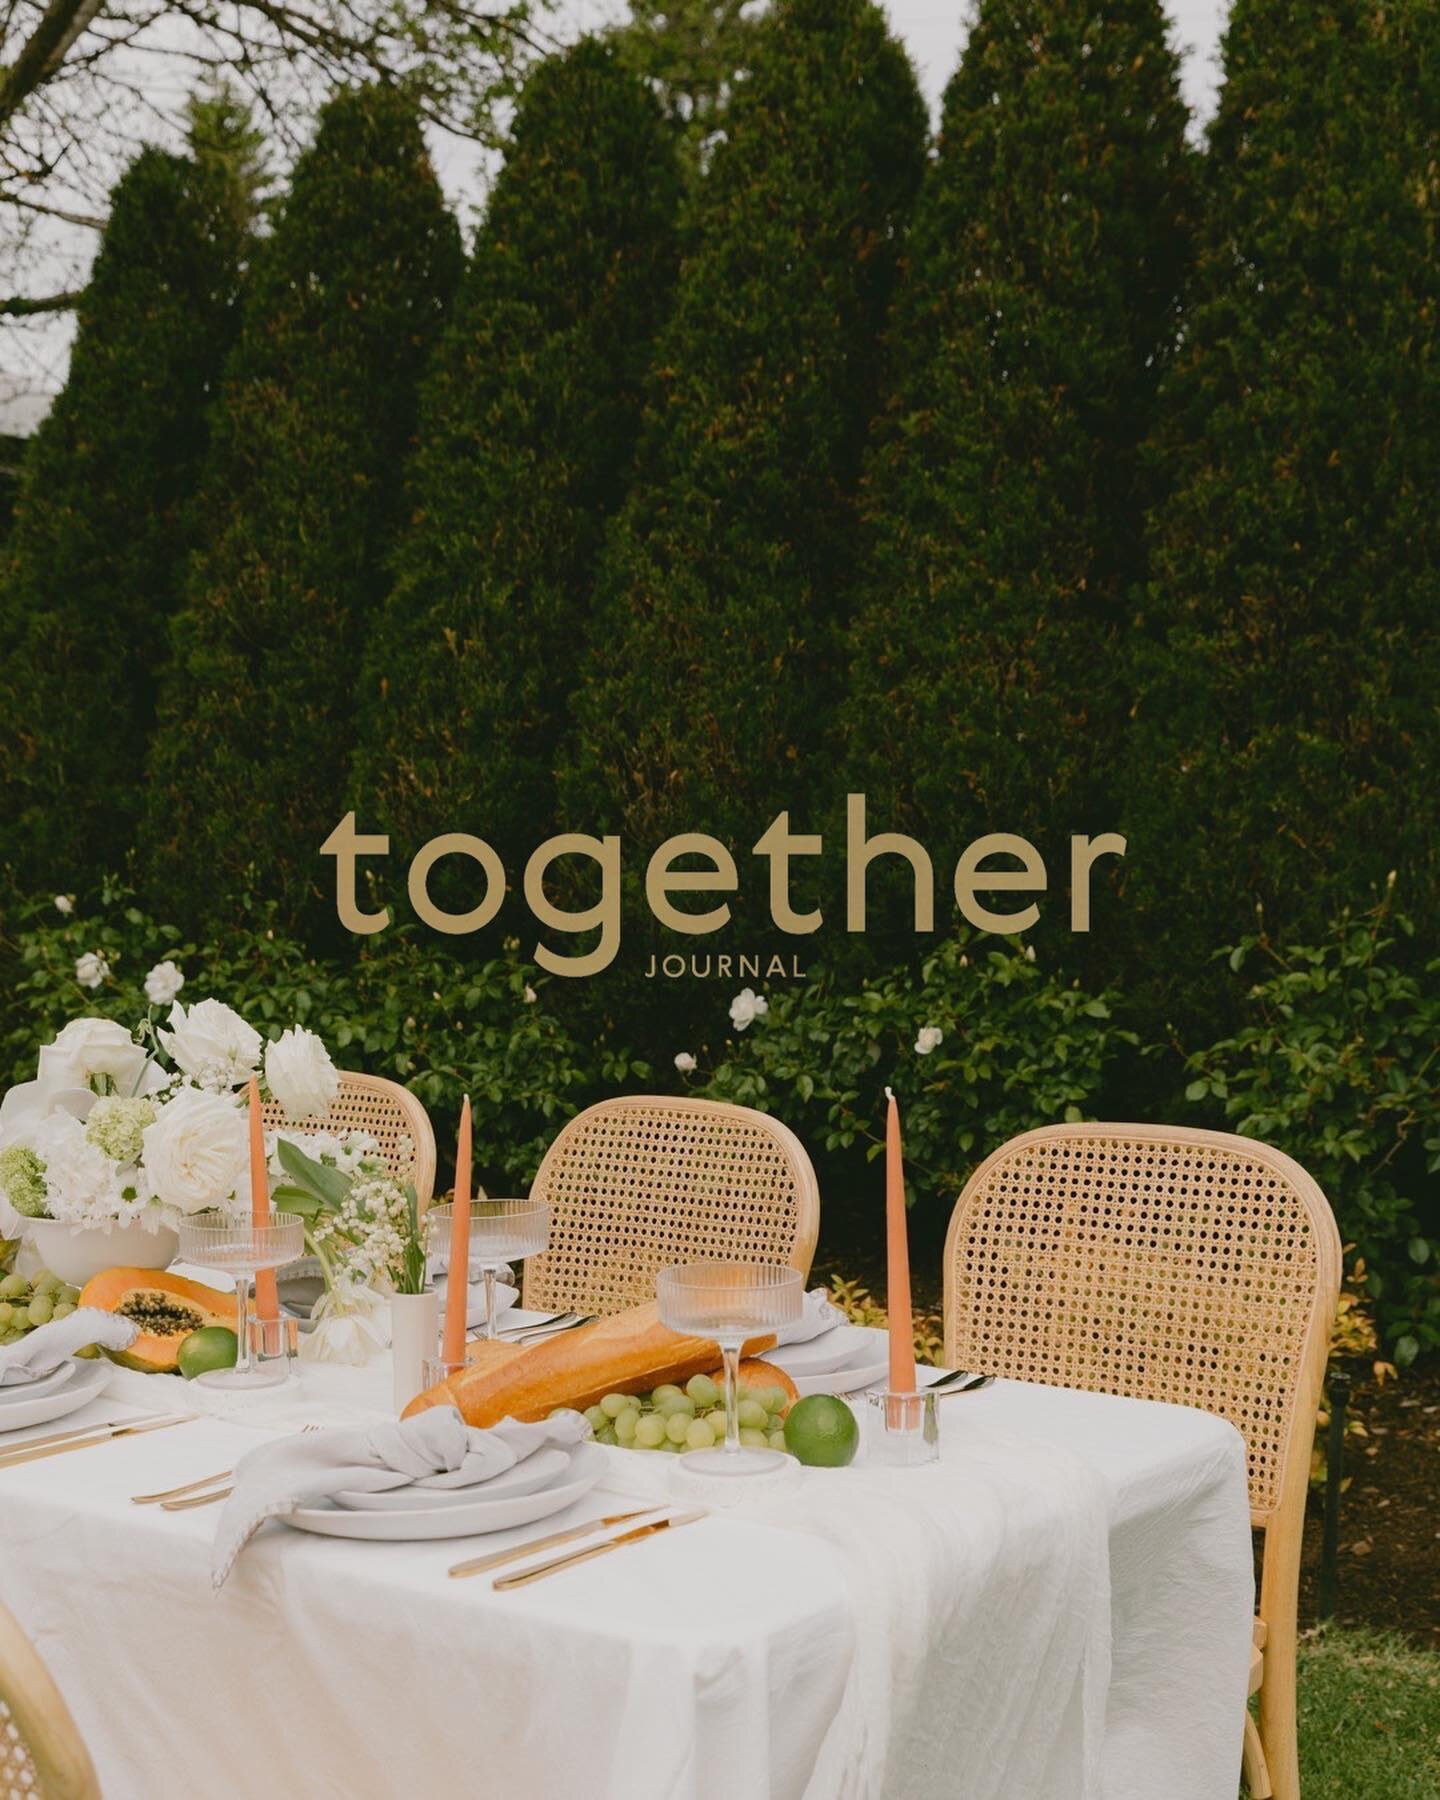 FEATURED in Together Journal, a Garden Soir&eacute;e ✨

In a world where everything seems fast-paced and fleeting, there is something undeniably magical about a garden soir&eacute;e especially captured in Film and Digital.

#togetherjournal #together